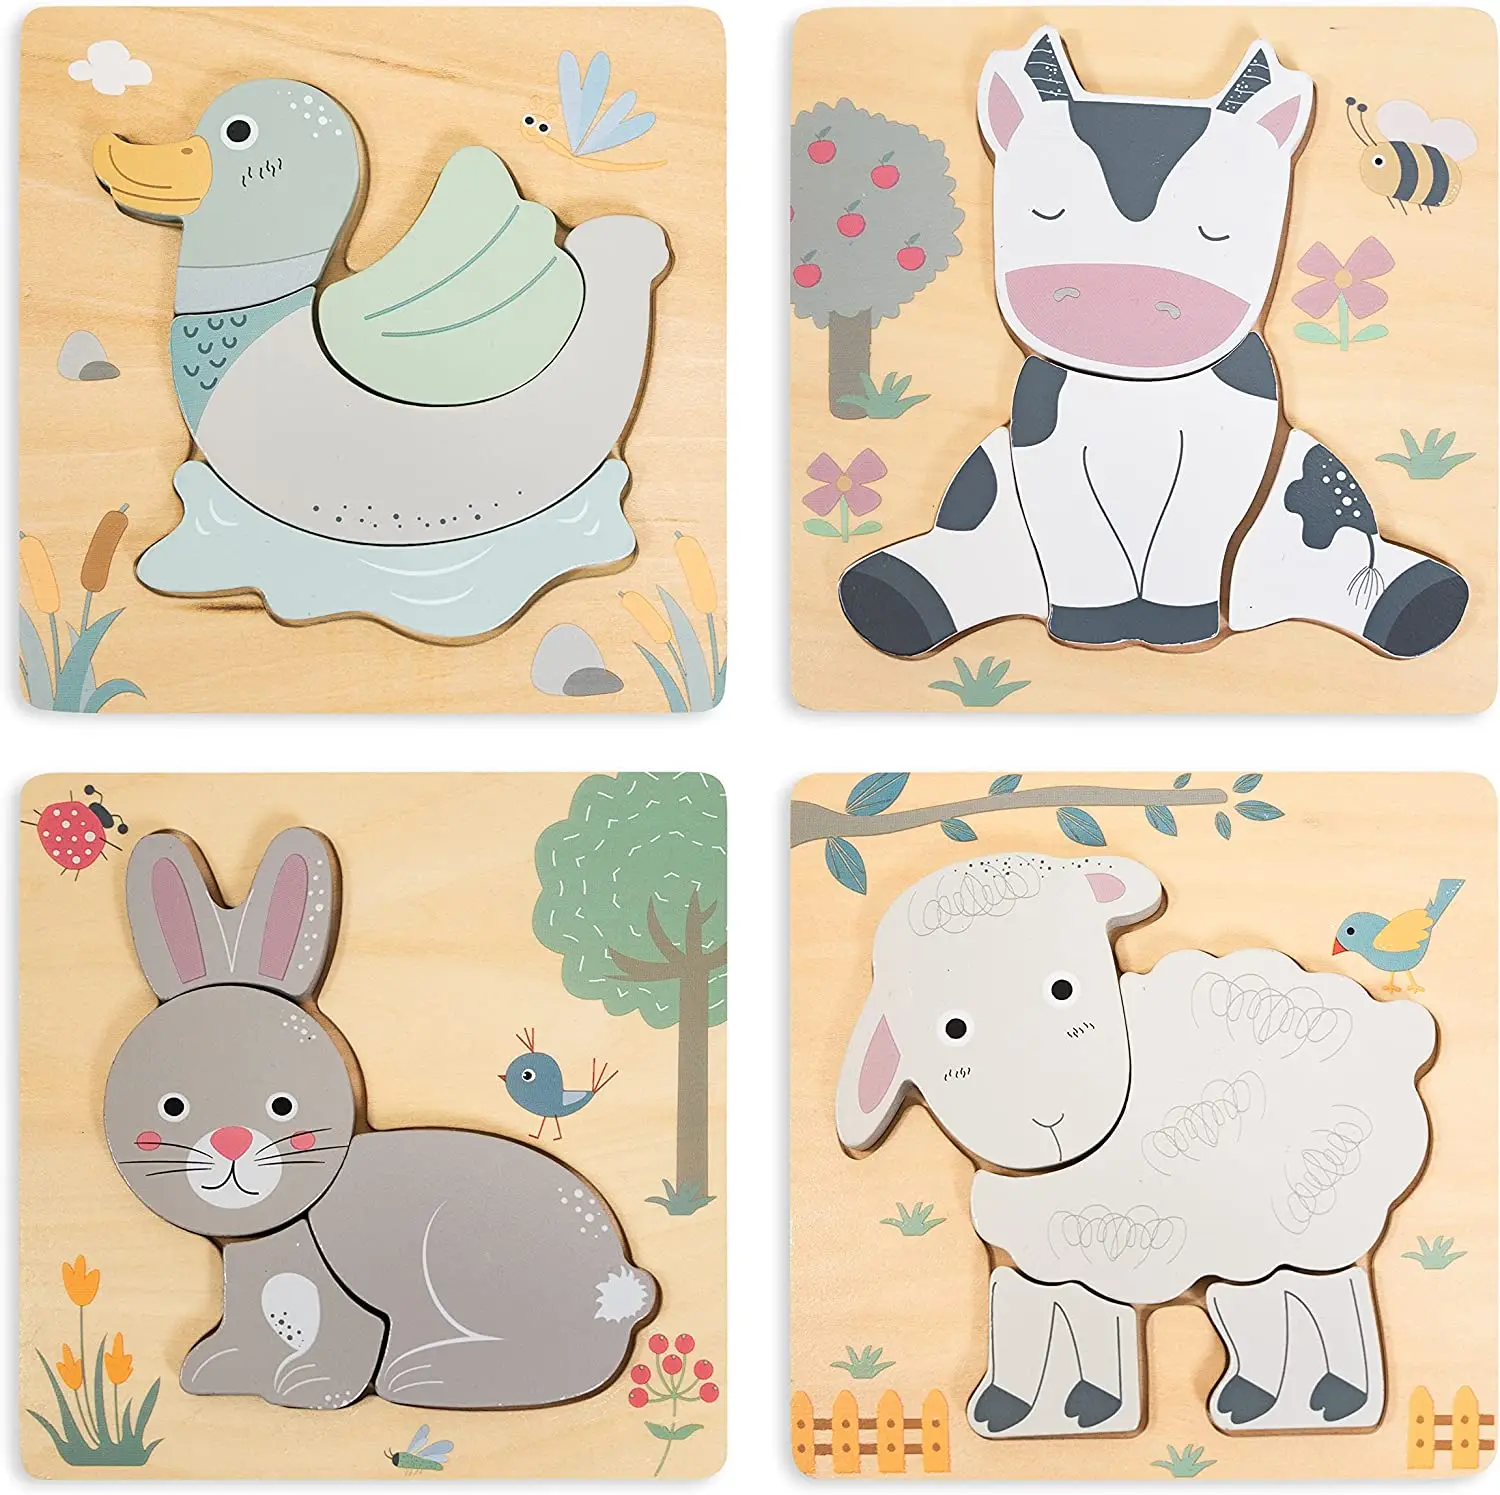 

4pk Animal Shape Wooden Puzzles Set for Toddlers Early Brain Development Learning, Toddler Montessori STEM Educational Gift Toy